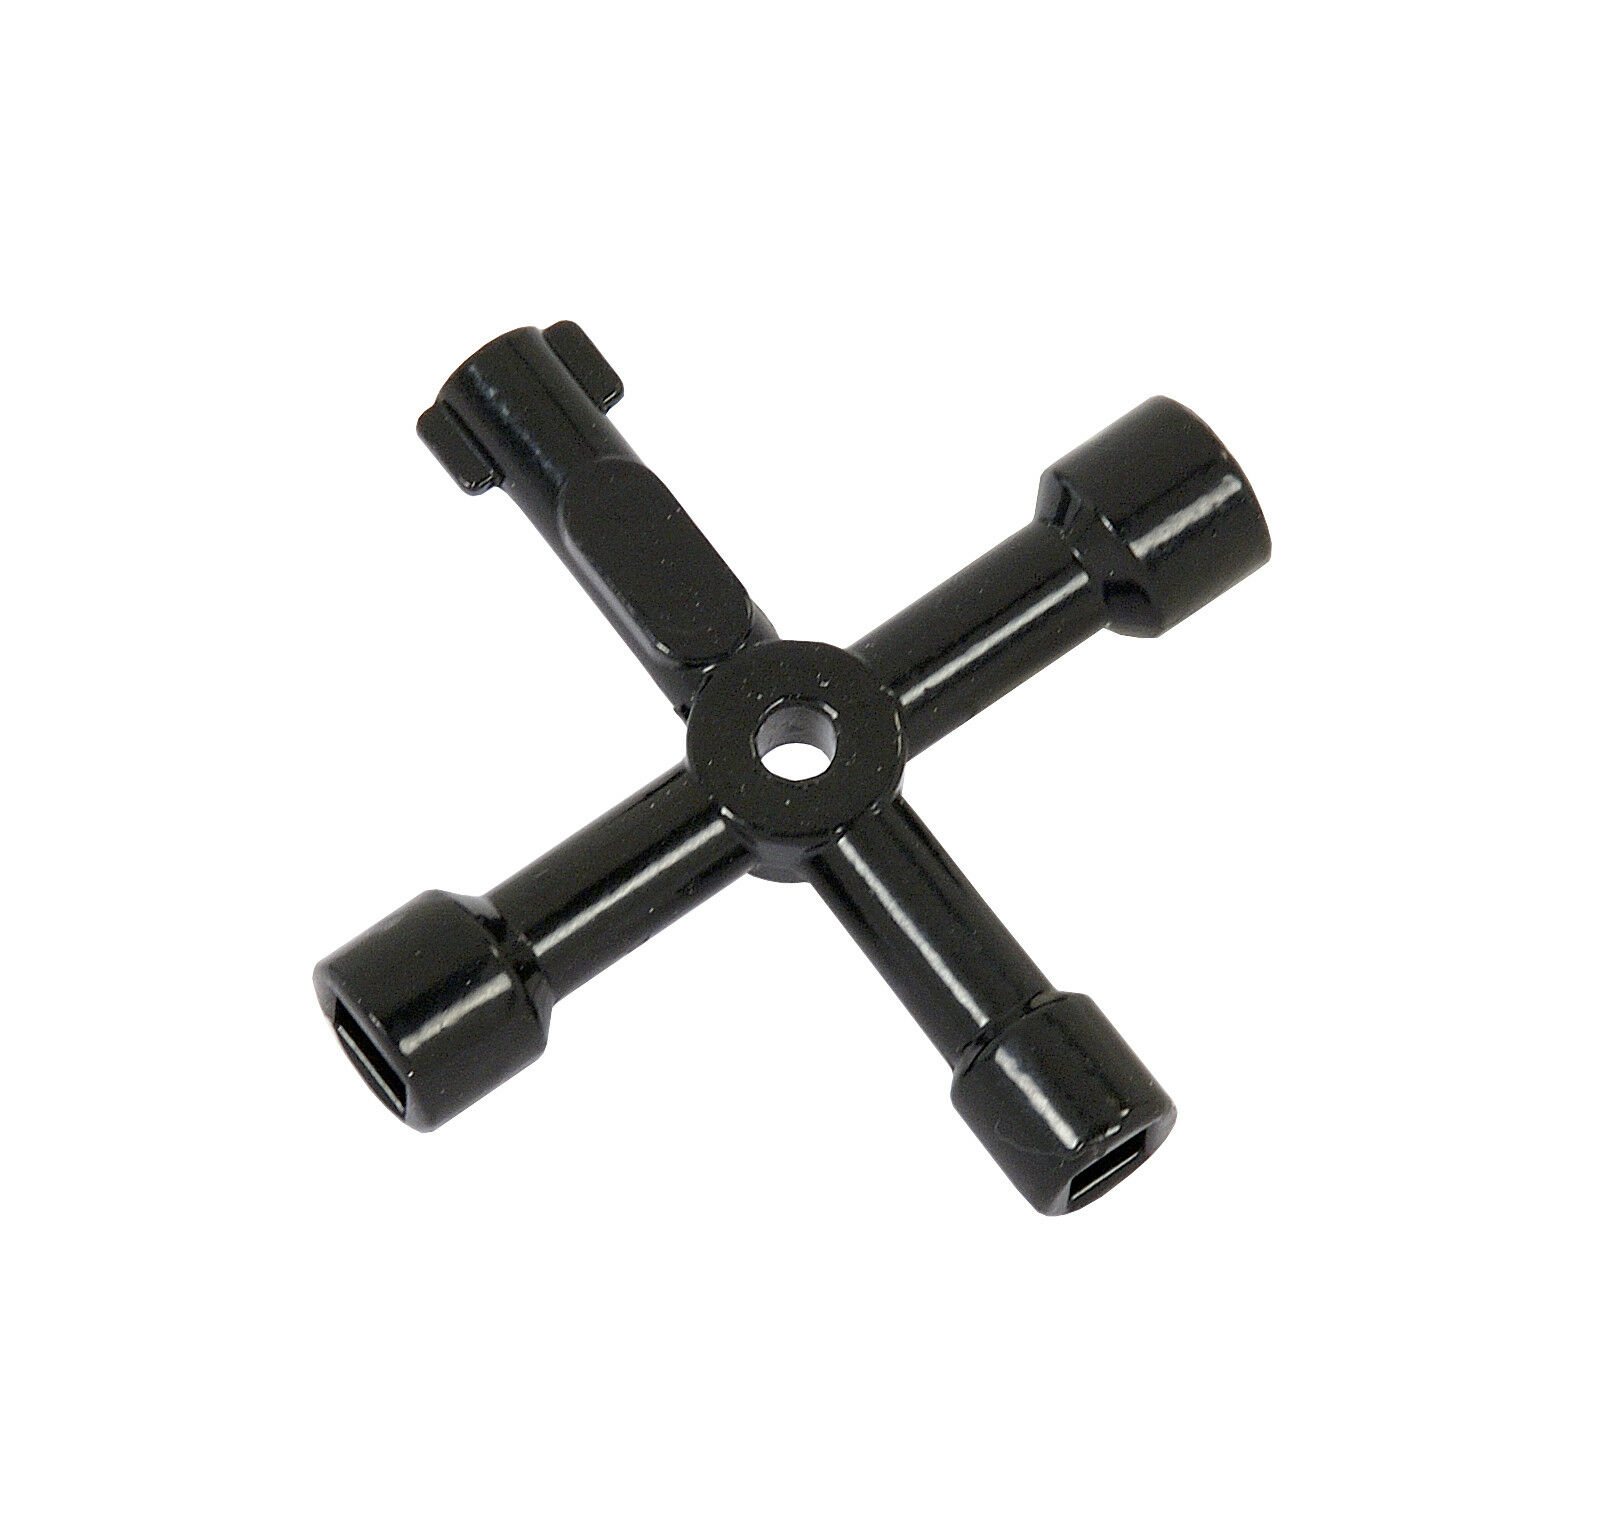 4 Way Utility Key Used For Meter Cupboards Stop Cocks Taps And Radiators